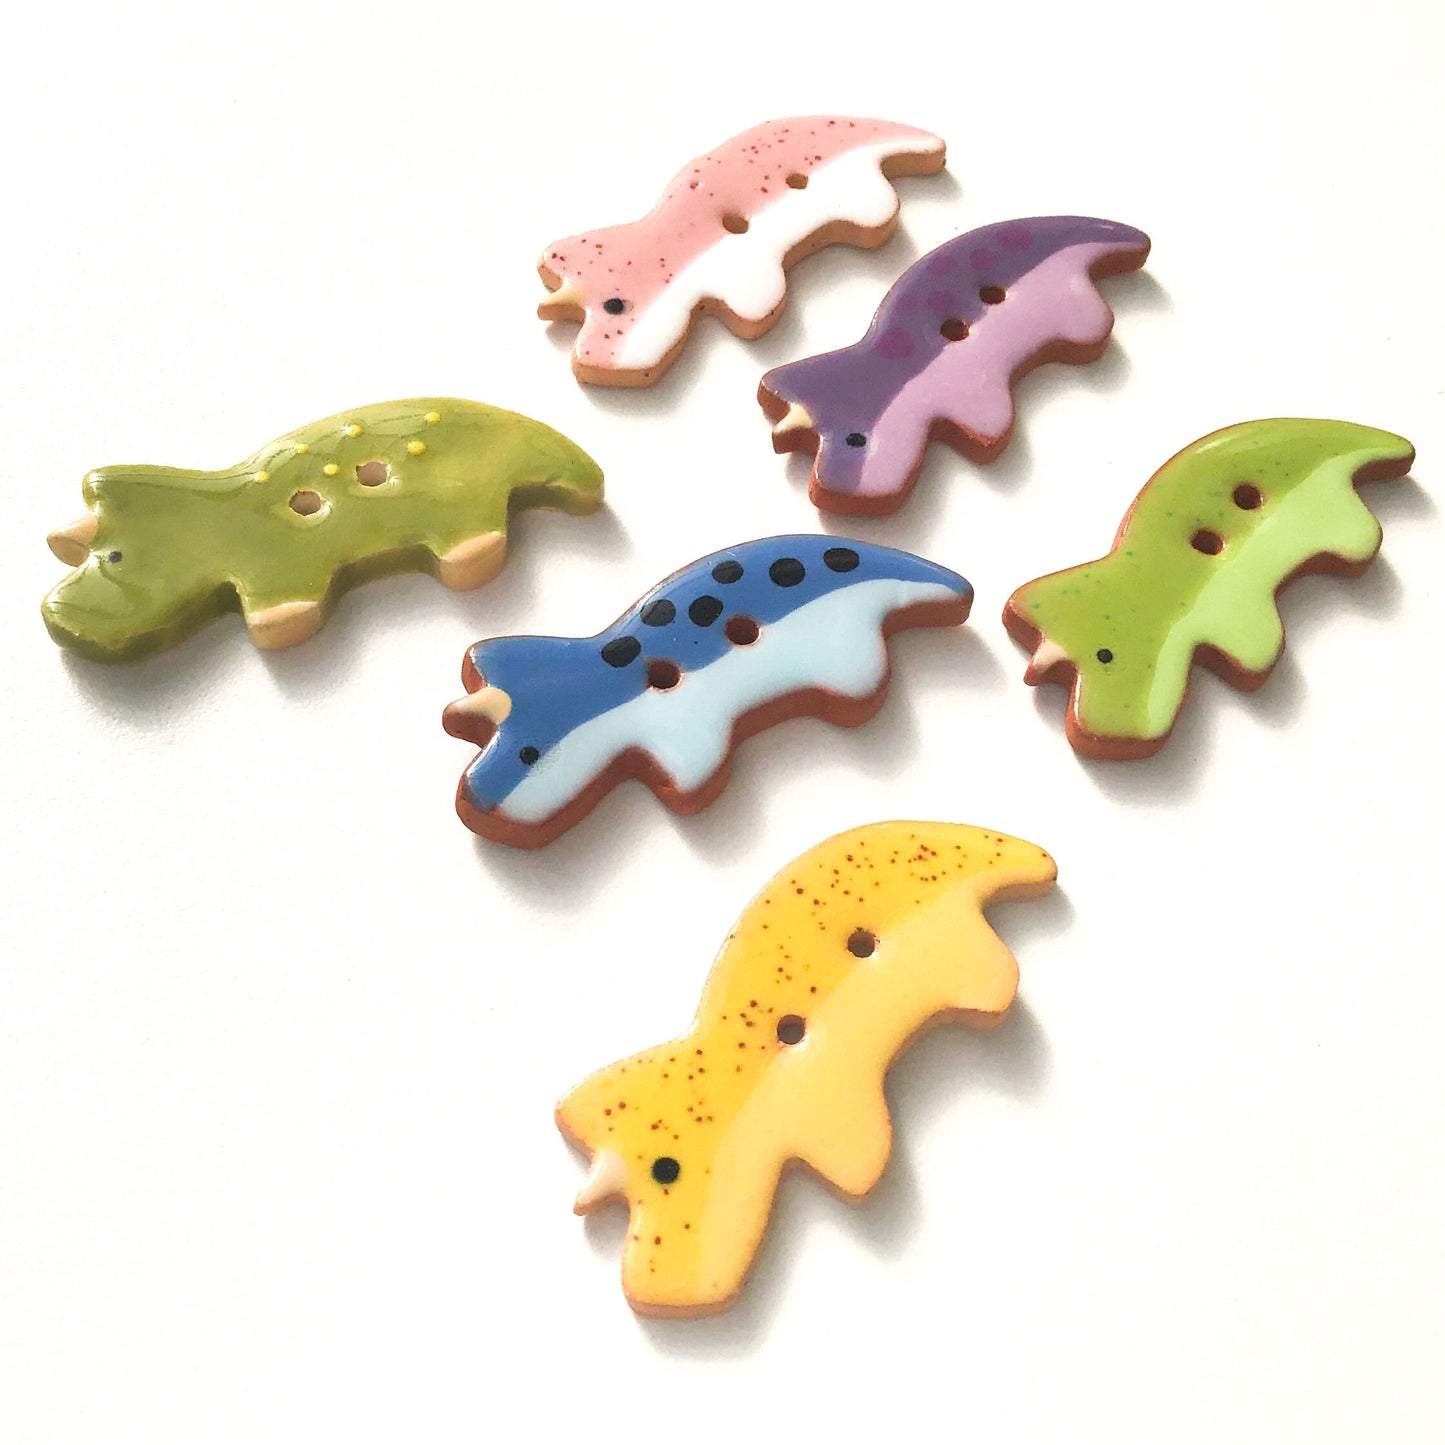 Triceratops Buttons - Ceramic Dinosaur Buttons - Children's Animal Buttons (ws-247)